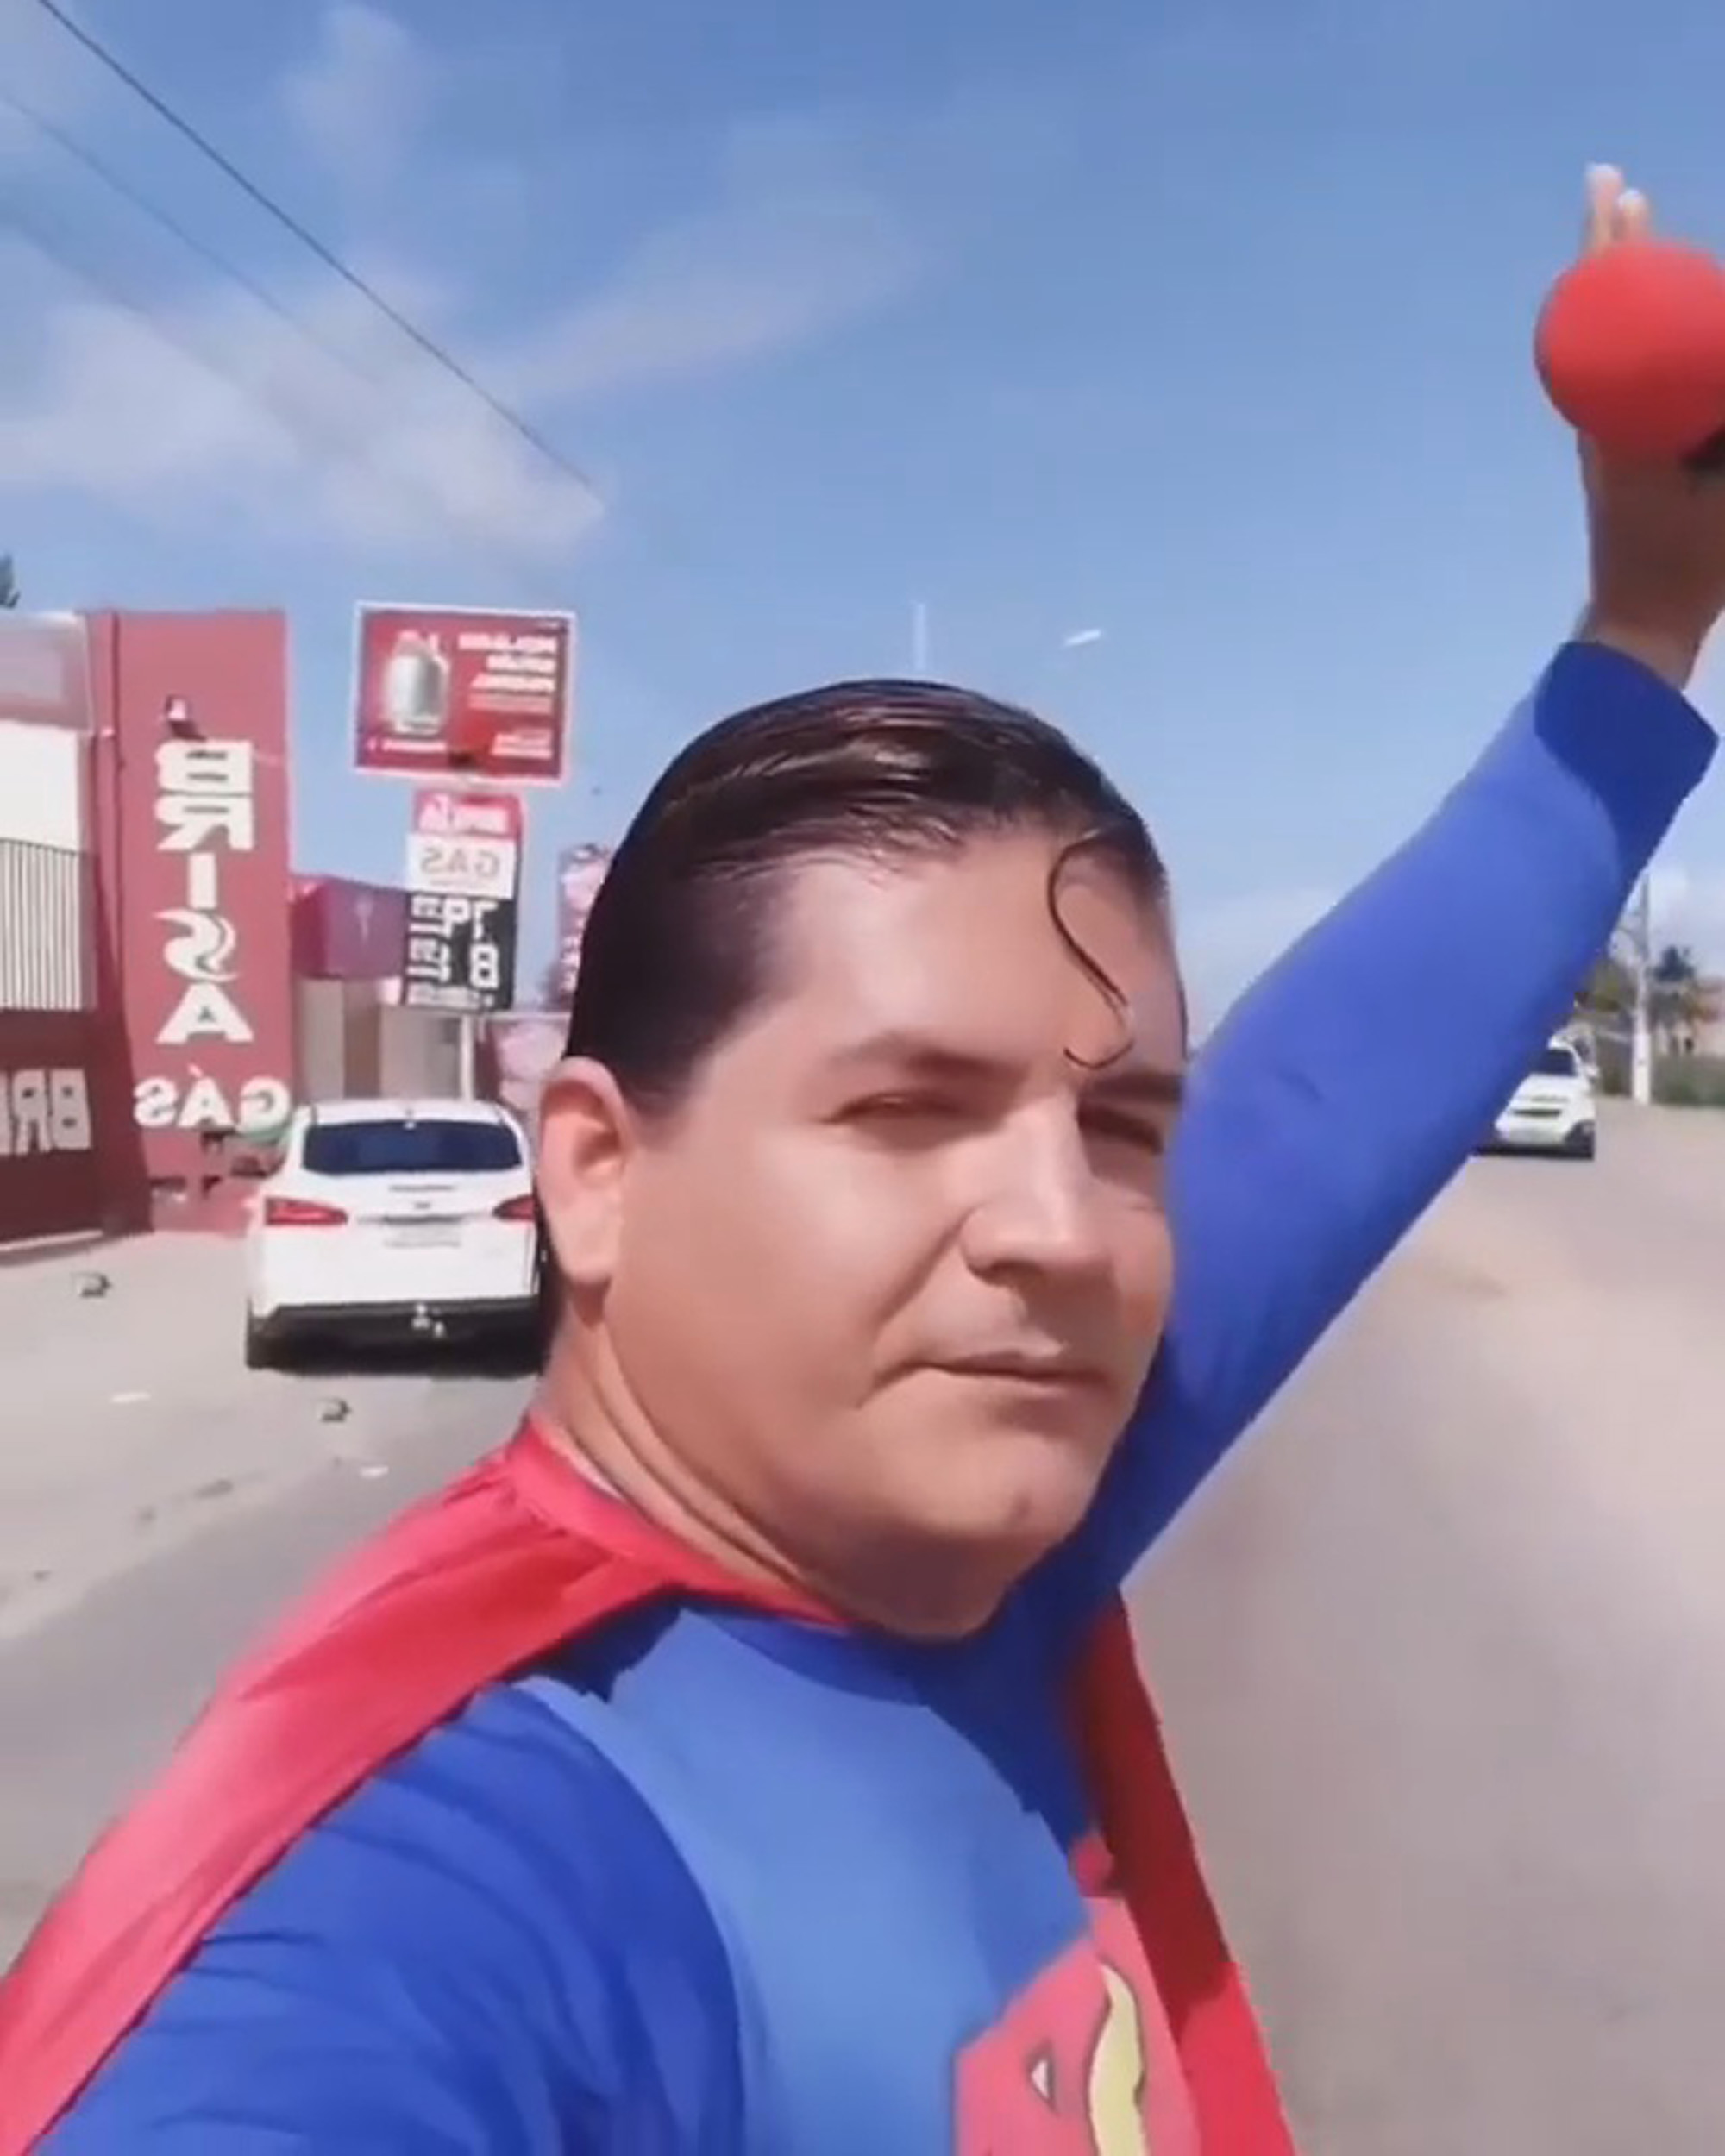 Read more about the article Moment Comedian Dressed As Superman Is Hit By Bus While Trying To Pretend Stopping It